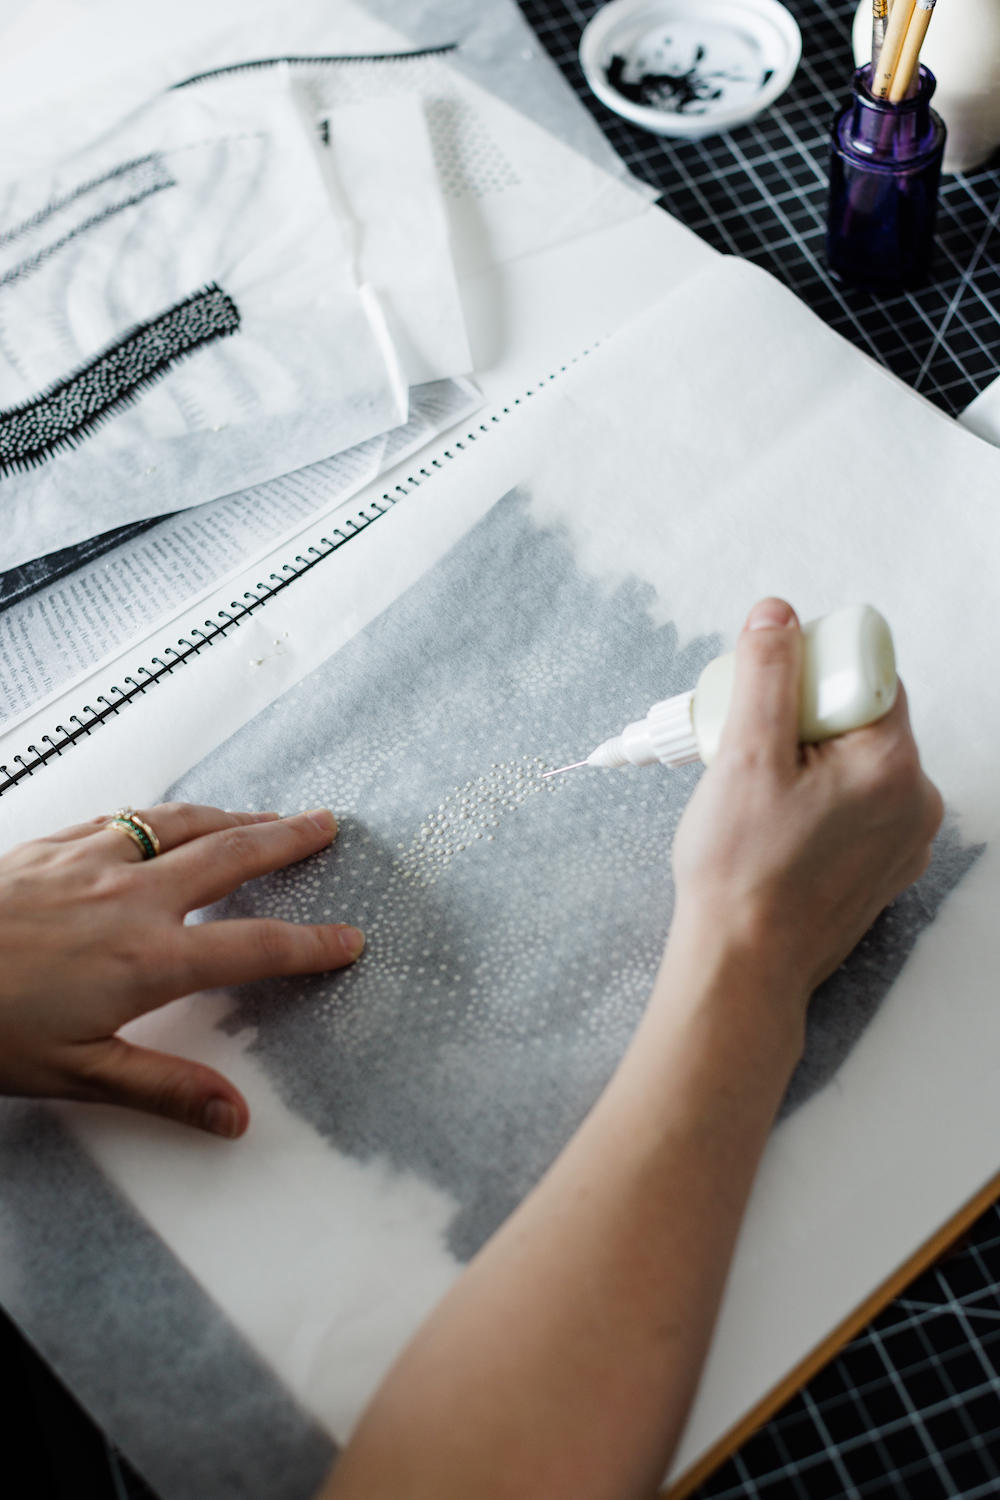 This designer employs a medley of artisanal techniques in her textiles